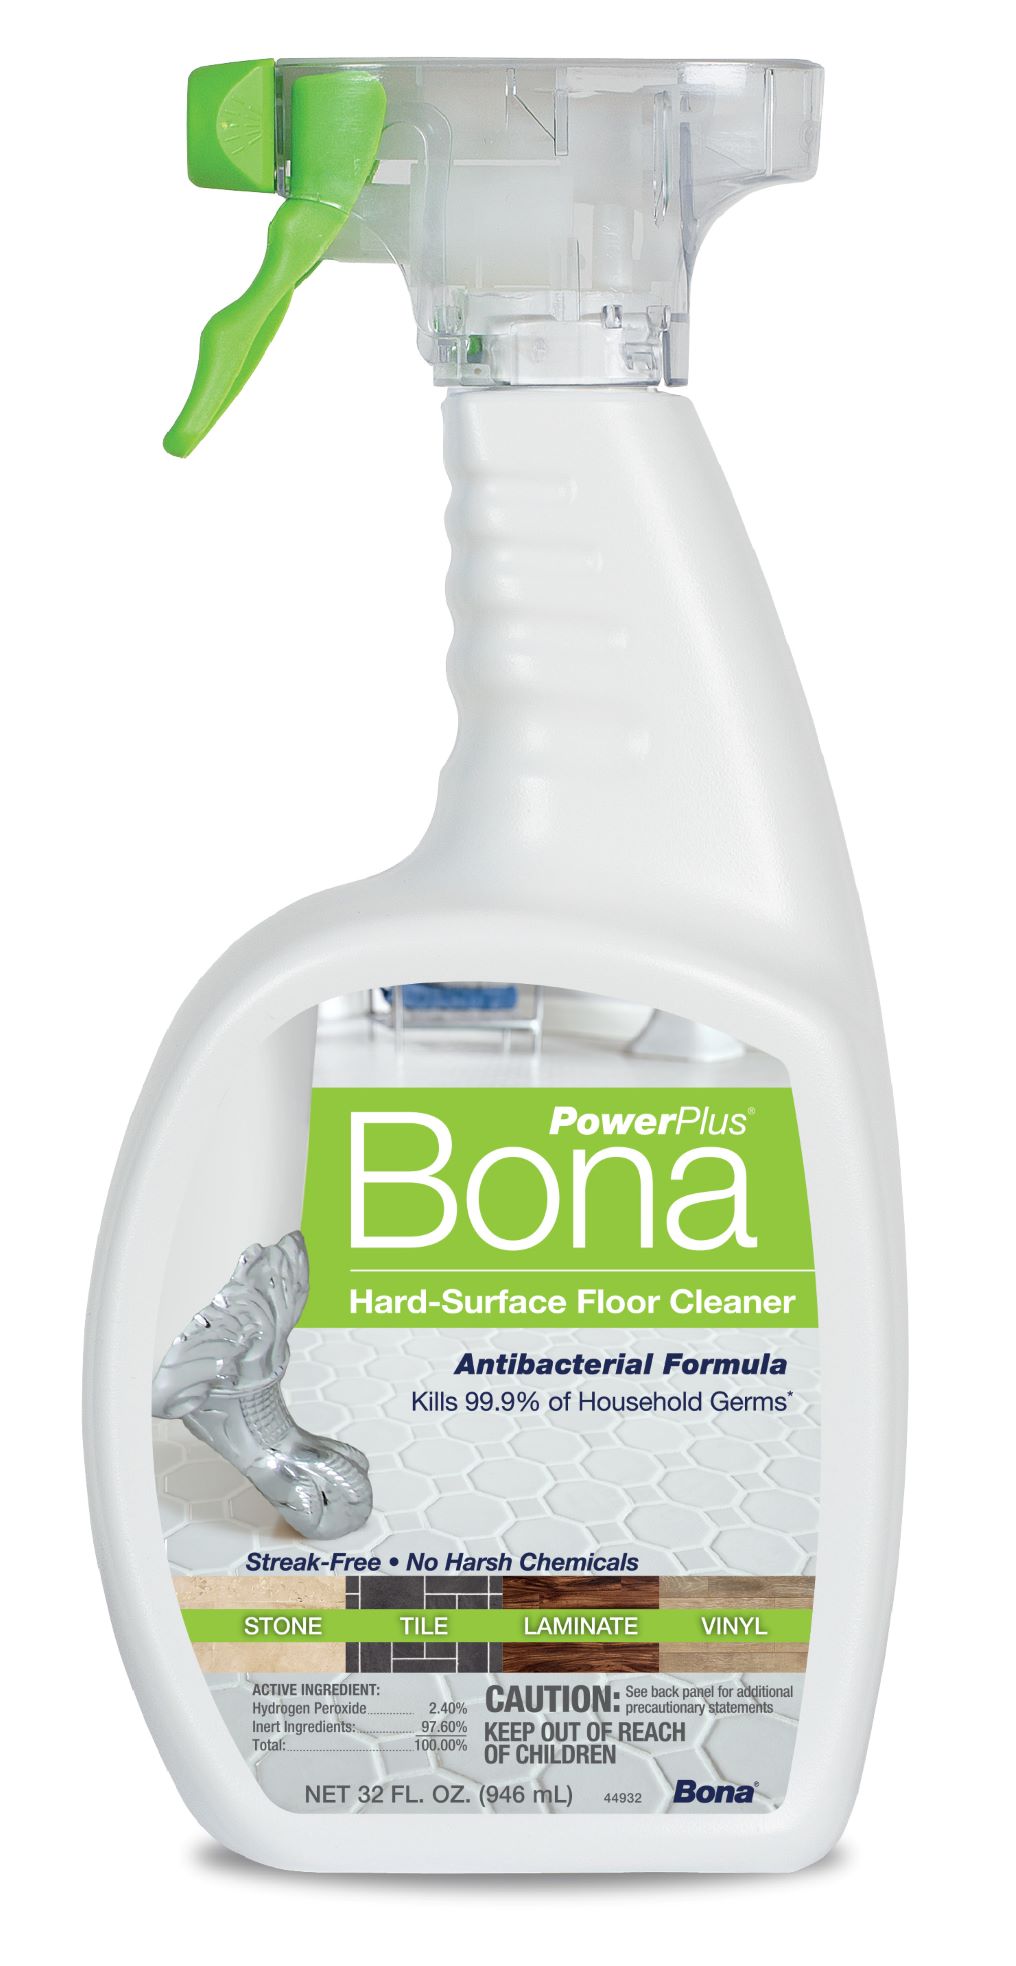 Bona PowerPlus® Antibacterial Hard-Surface Floor Cleaner is a hydrogen peroxide-based disinfectant cleaning solution specifically designed for floors; kills 99.9 percent of household germs. 